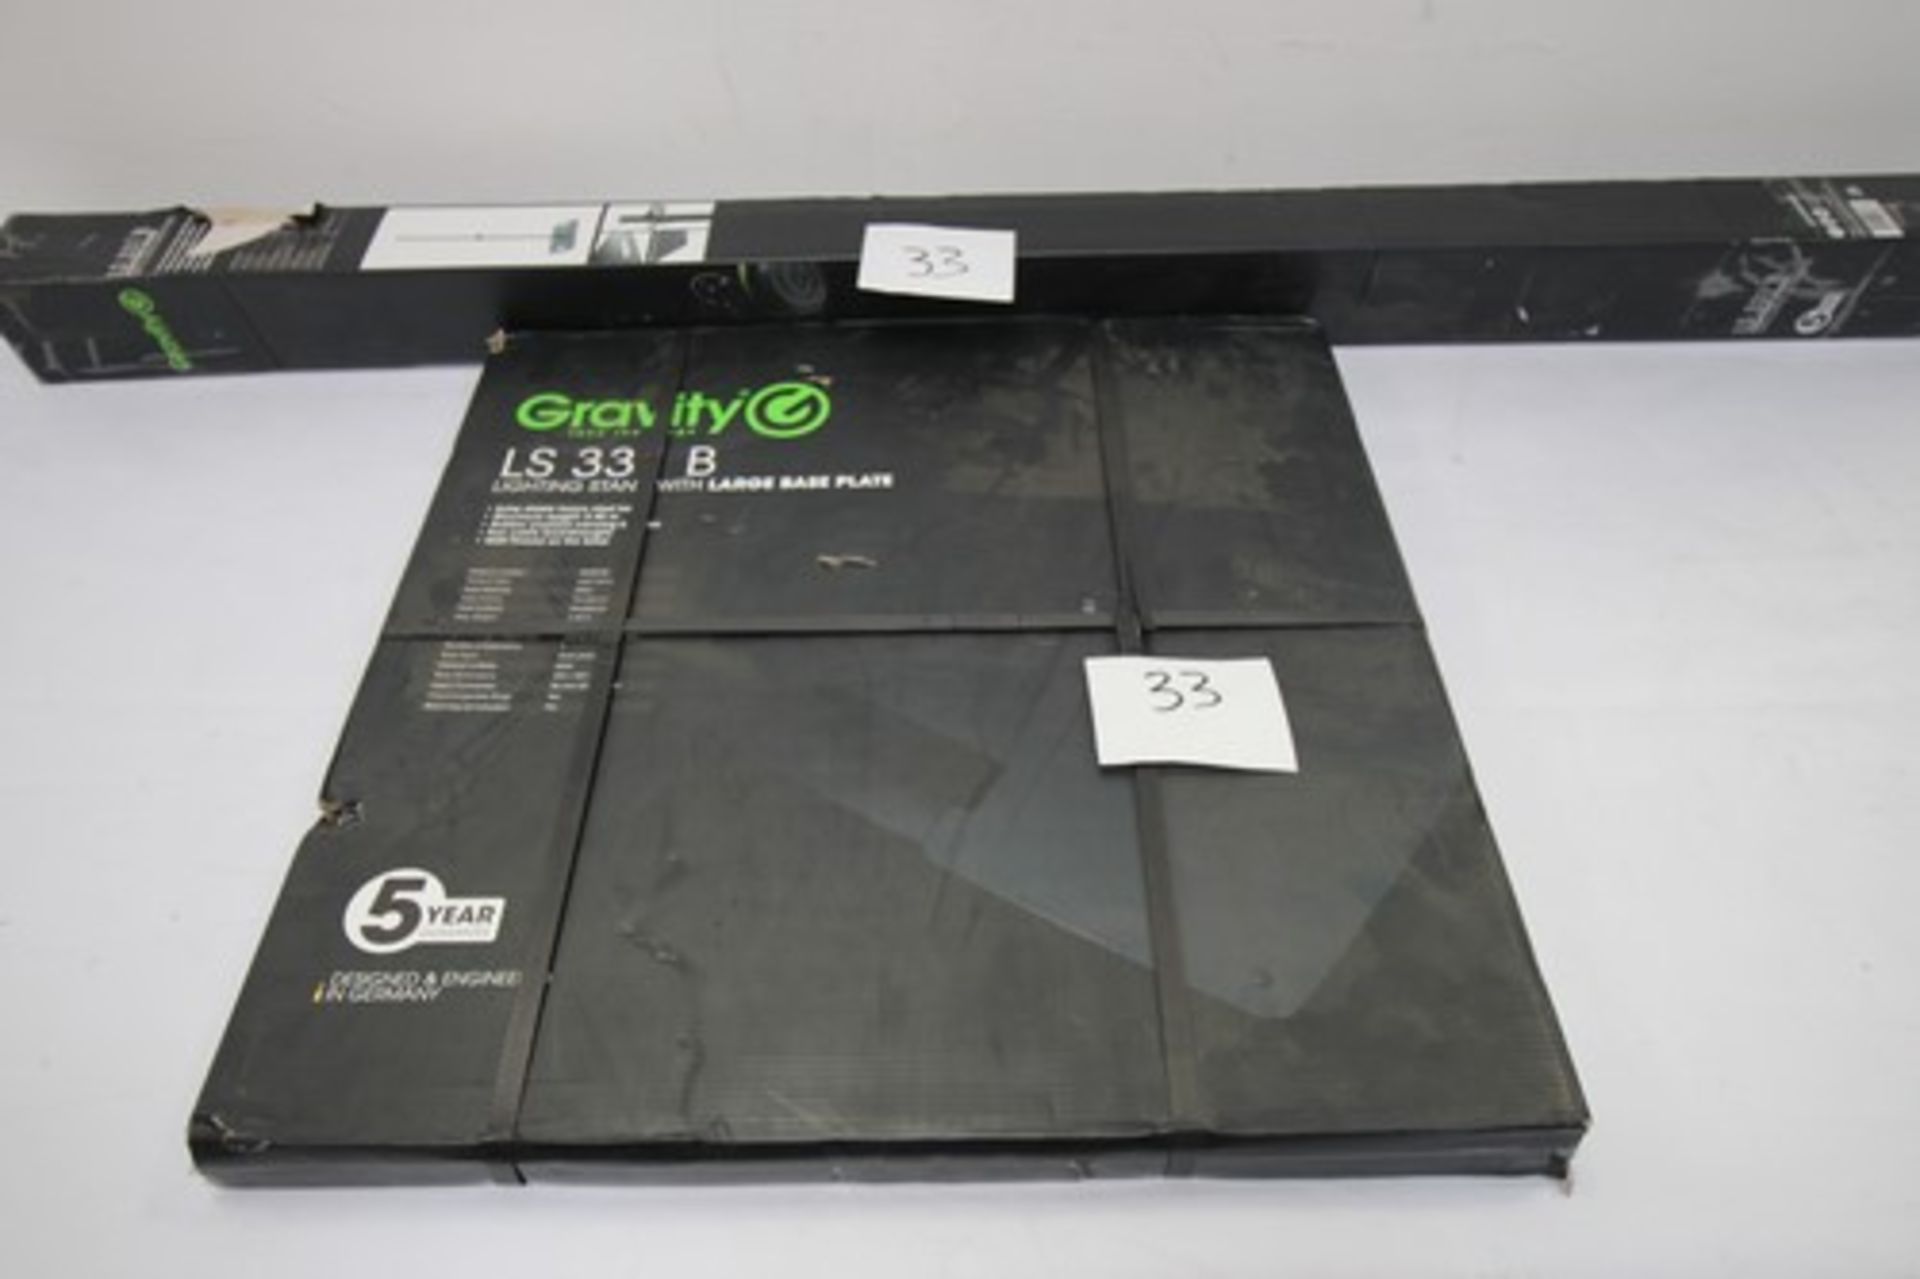 1 x Gravity large lighting stand with base, ref: LS331B - sealed new in box (ES5)